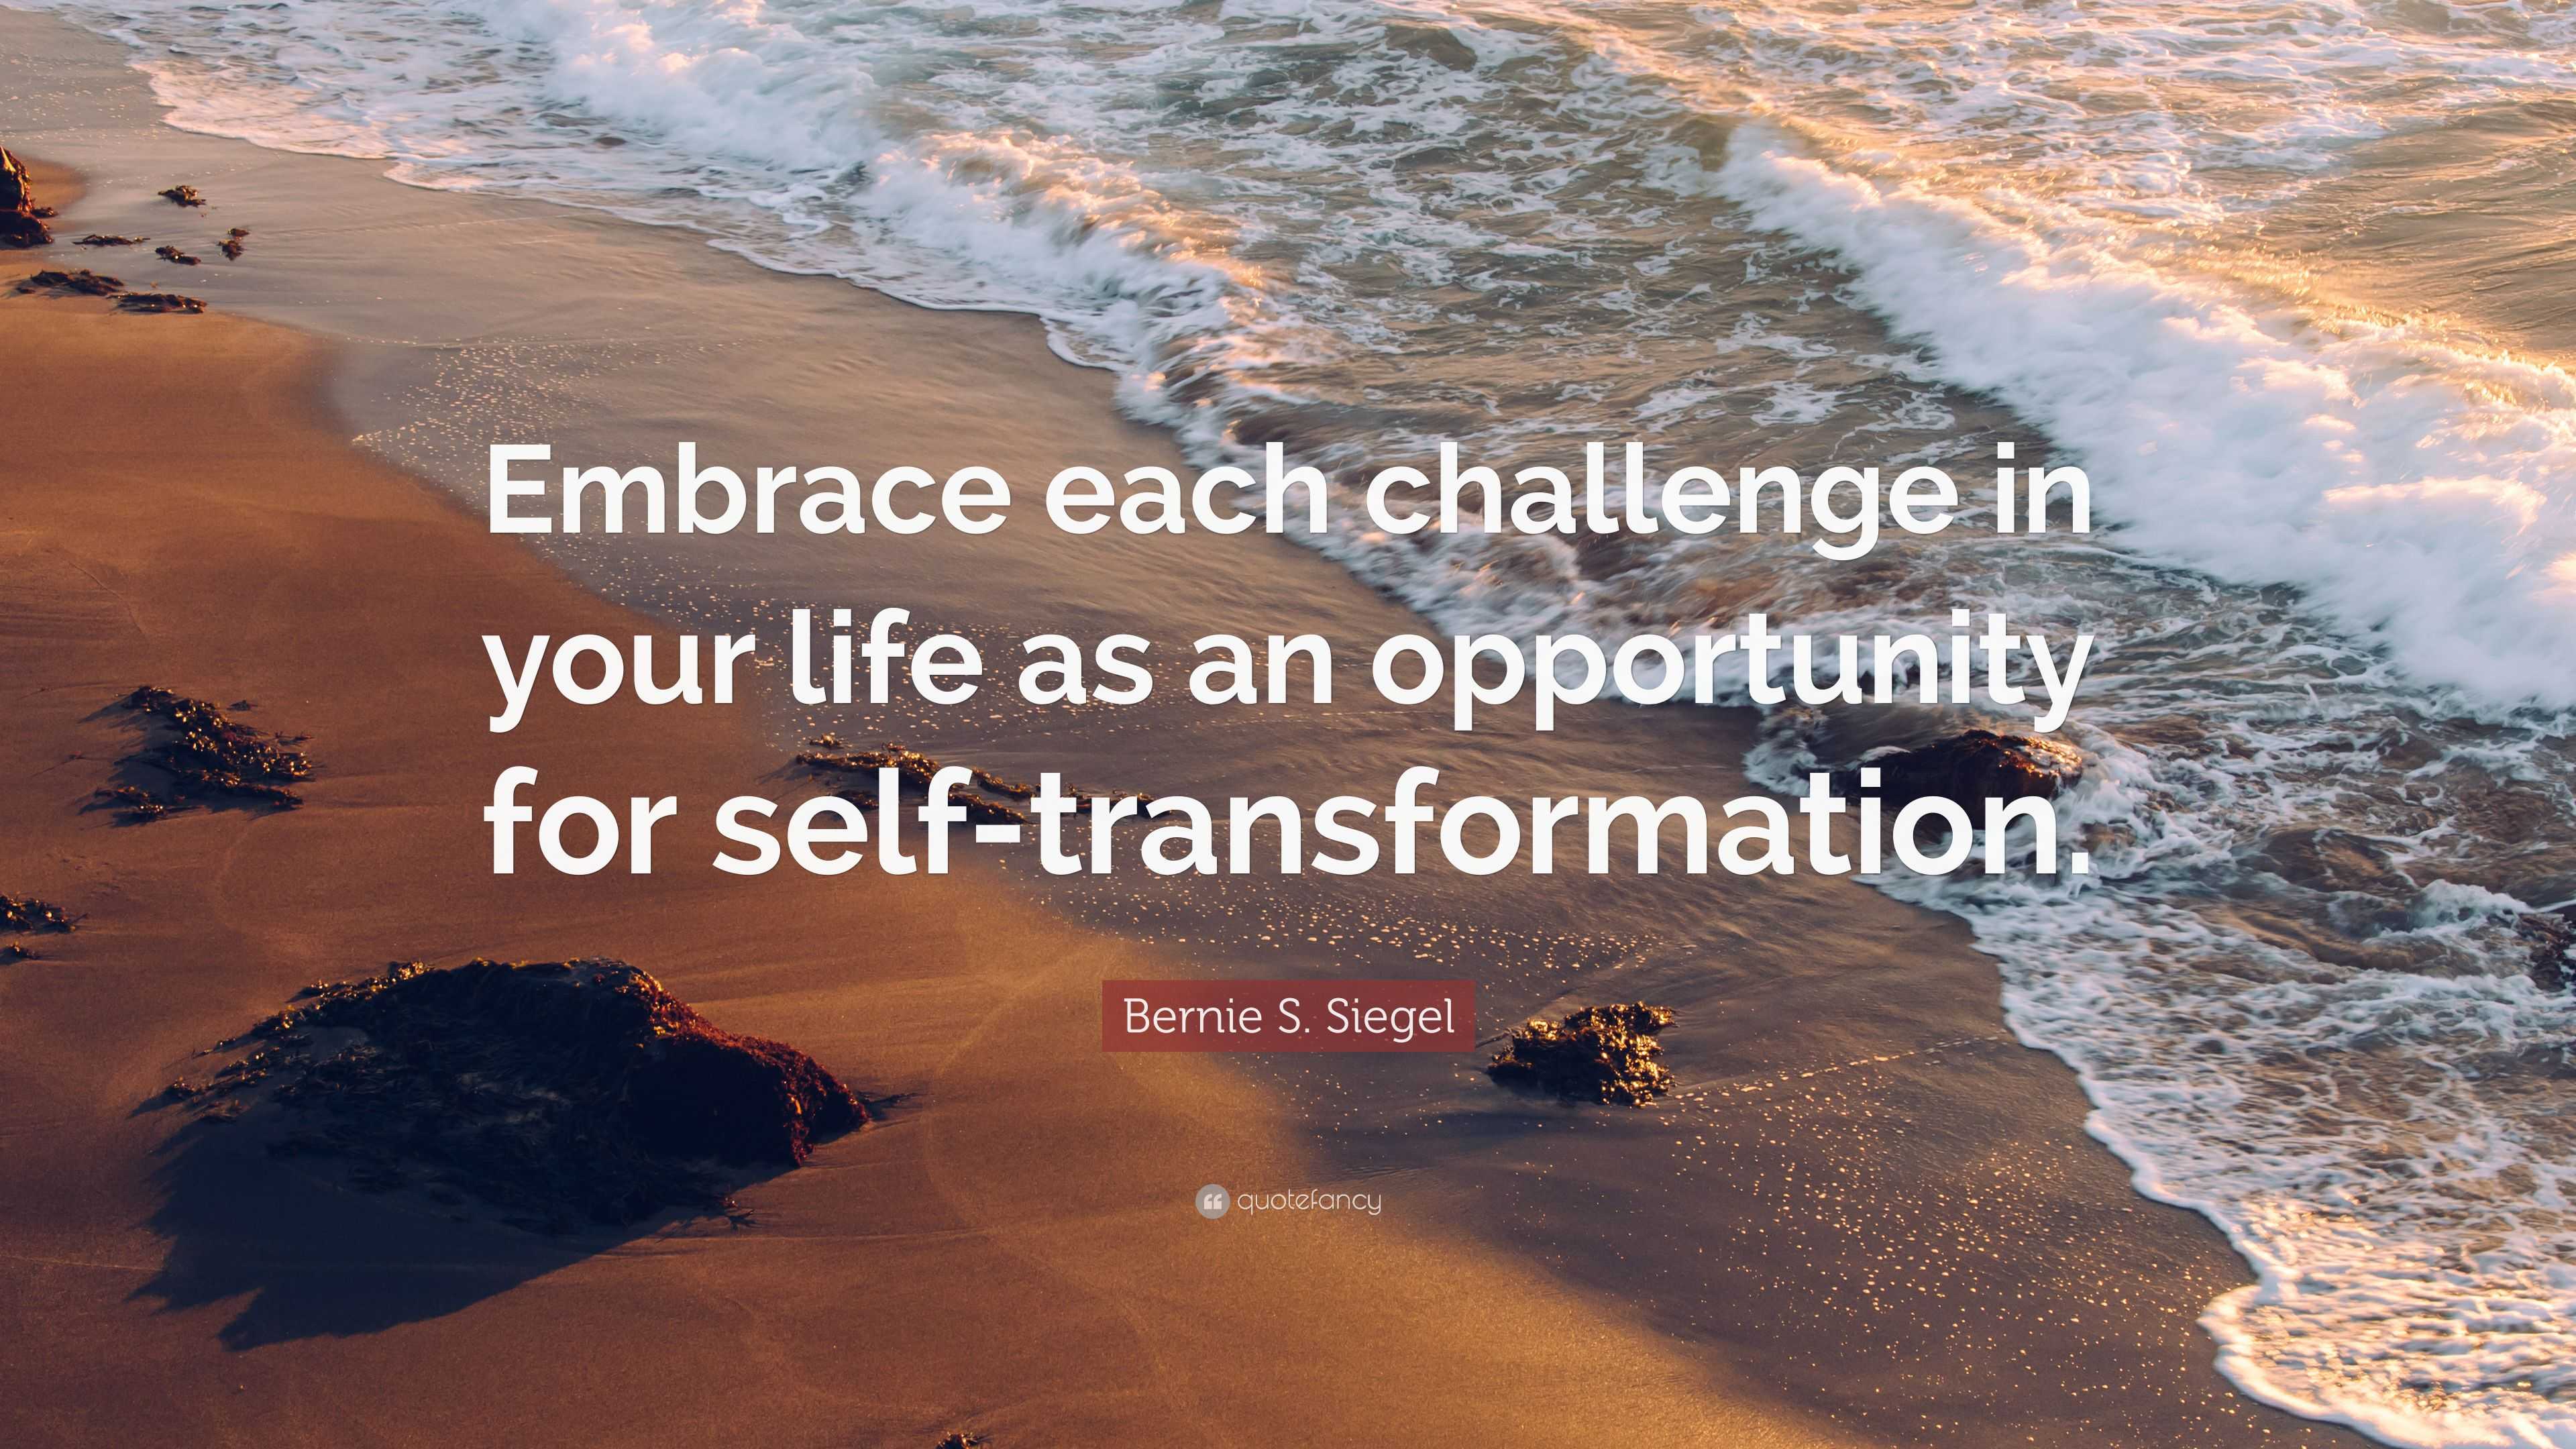 Bernie S. Siegel Quote: “Embrace each challenge in your life as an ...